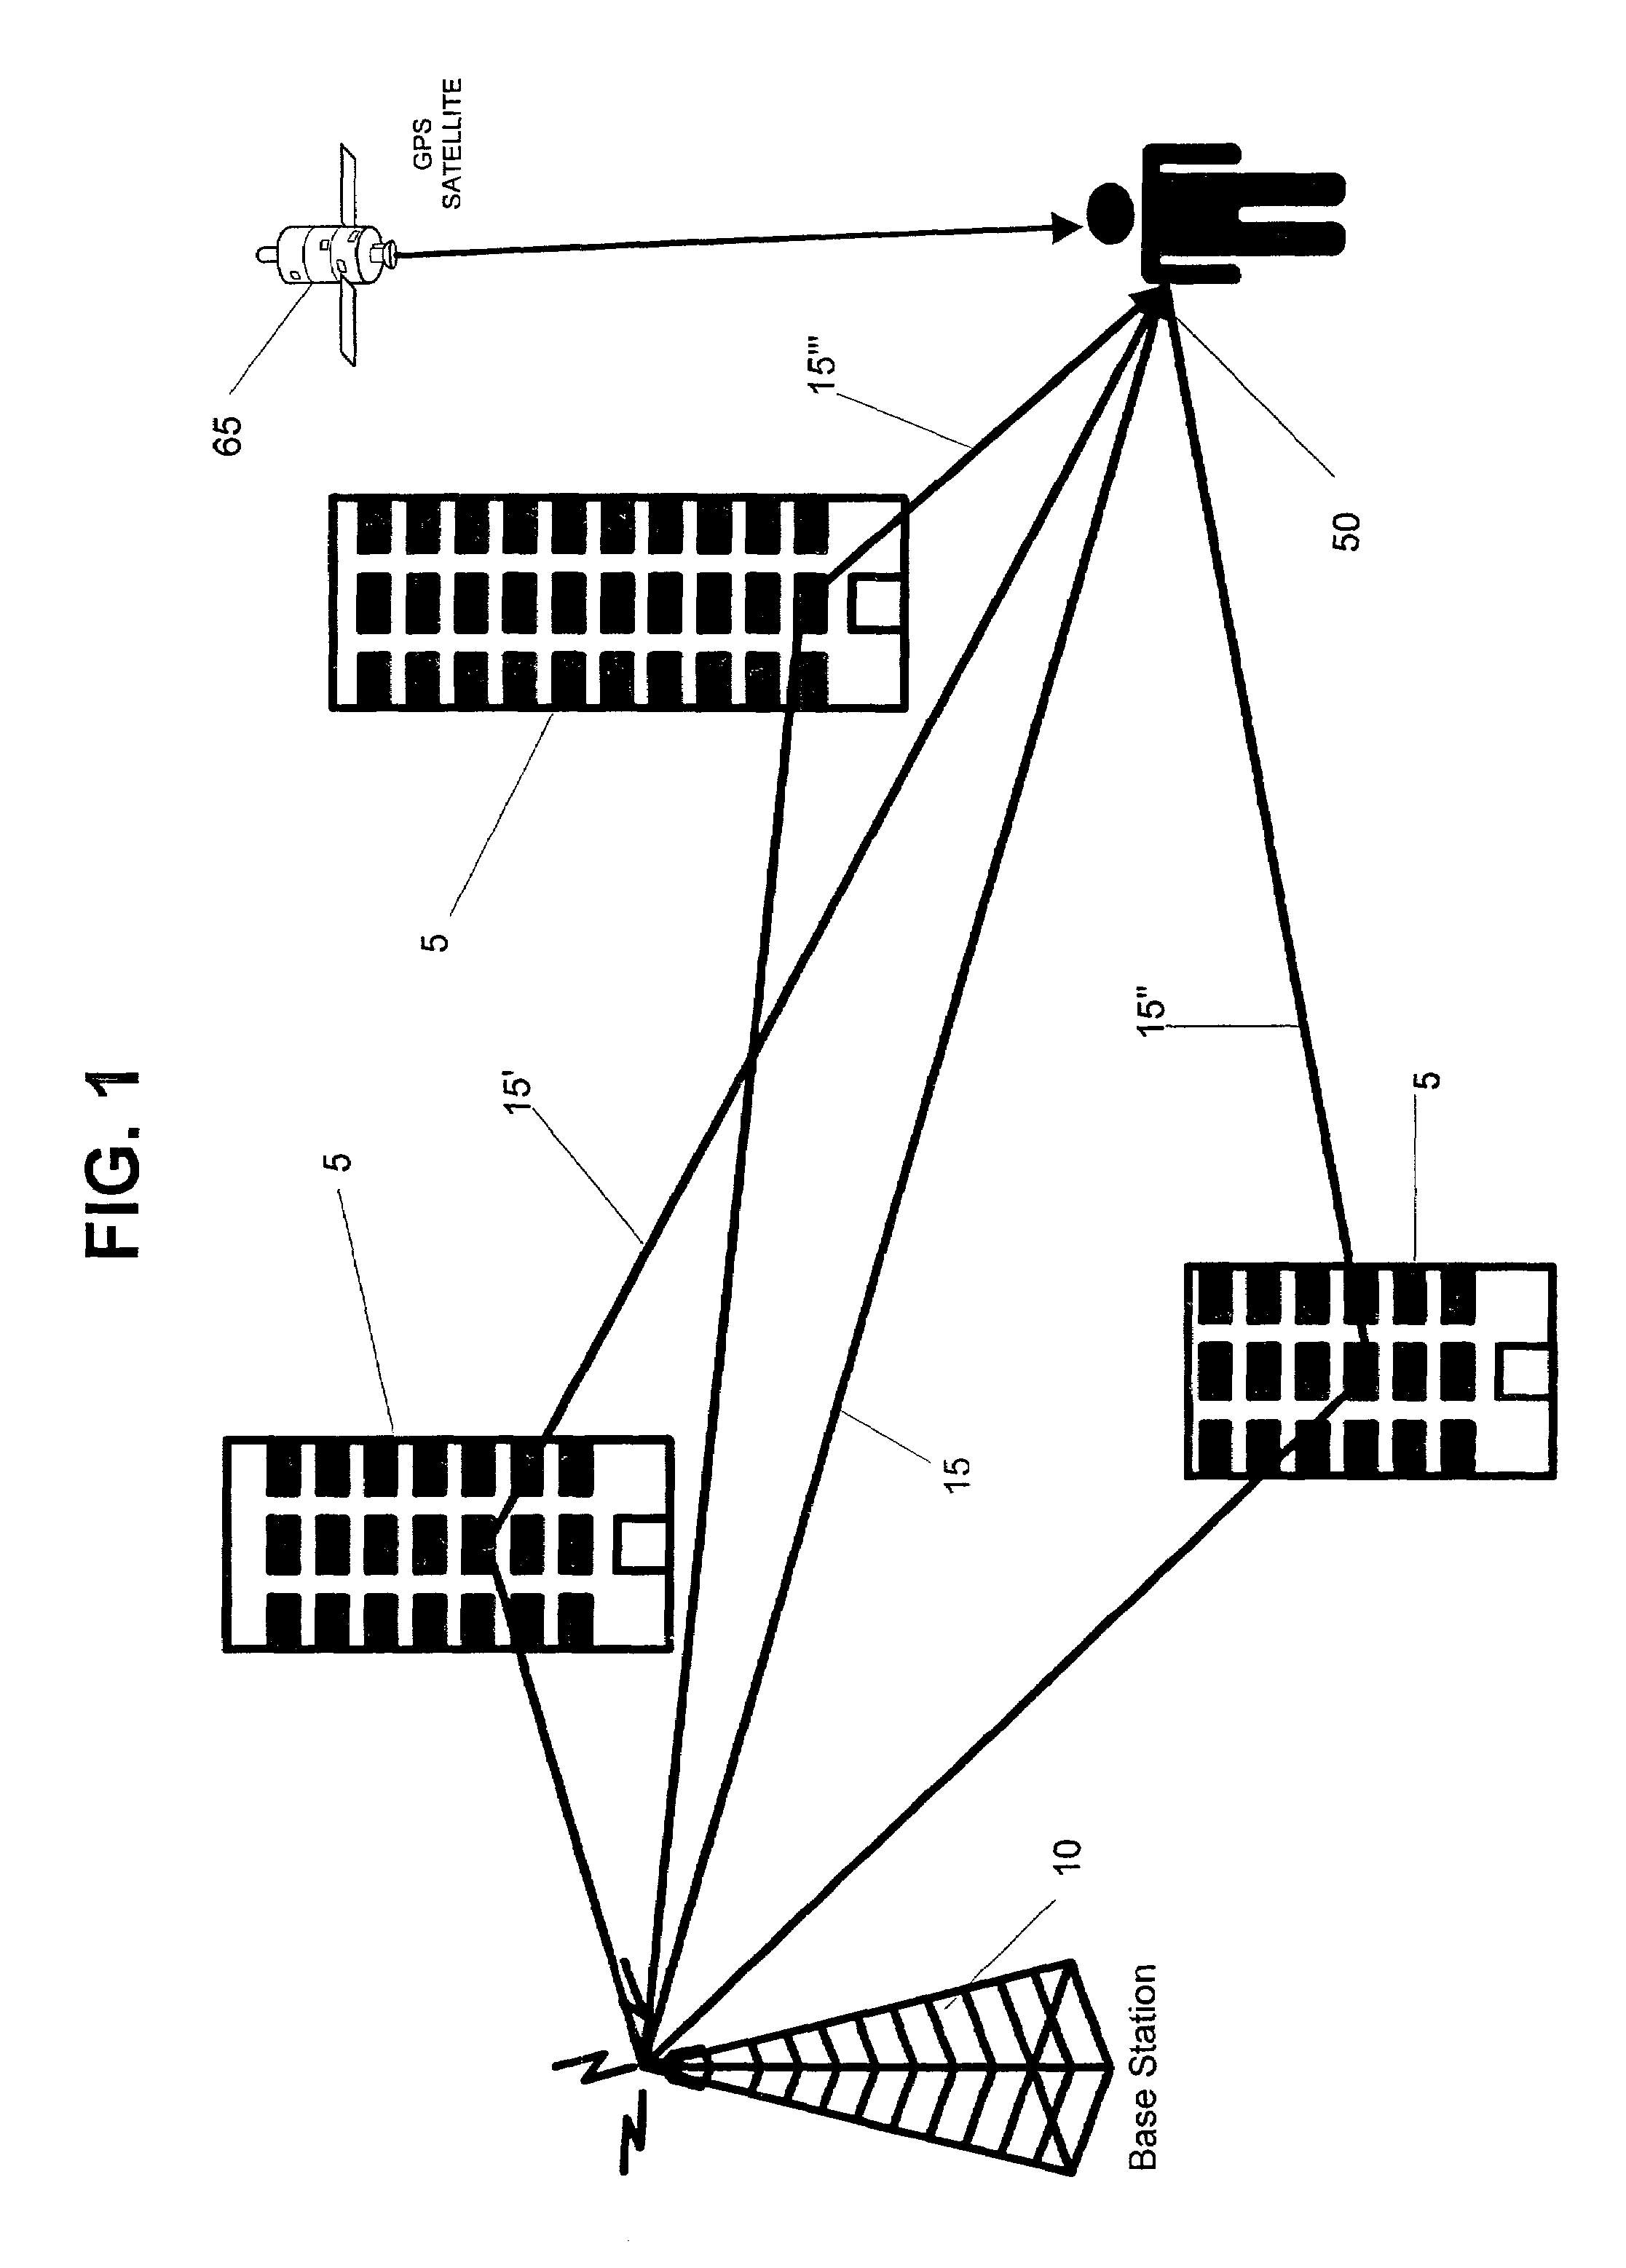 System and method for reducing multipath interference in packetized wireless communication systems